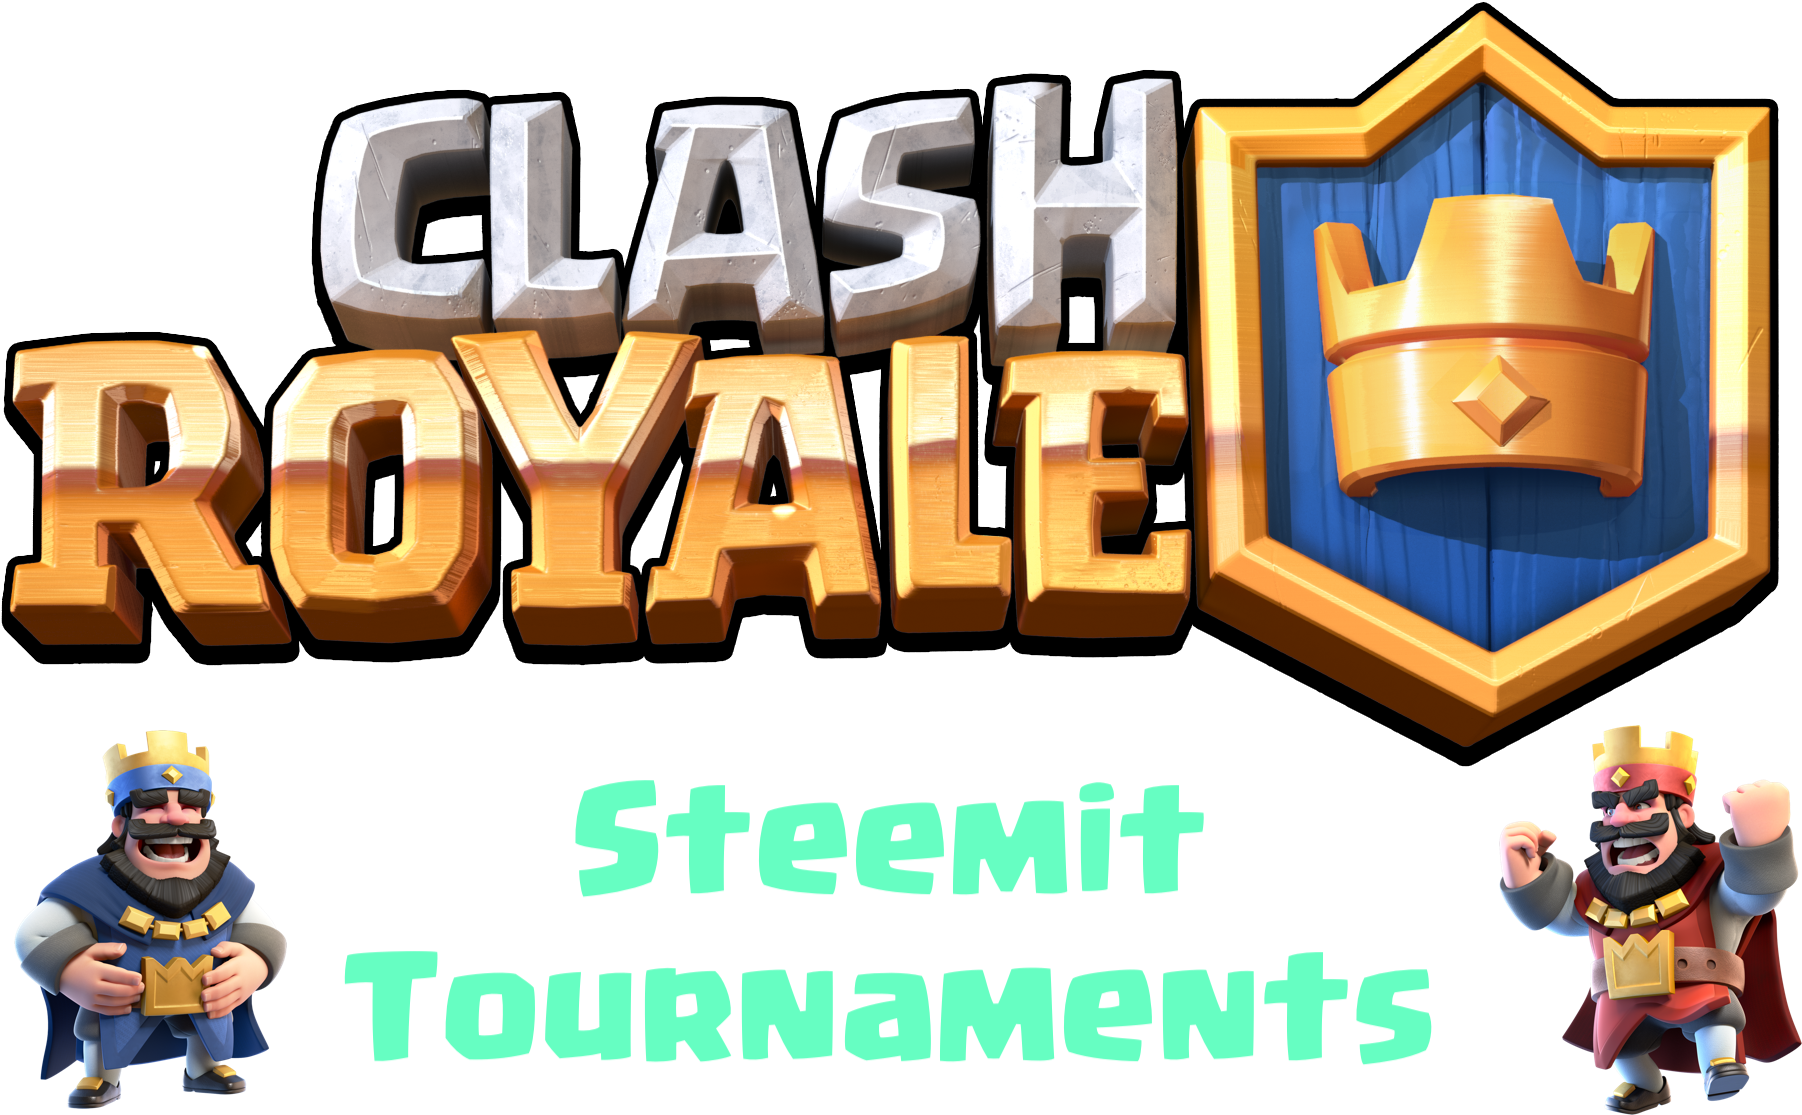 Clash Royale Is A Game Developed And Published By Supercell - Clash Royale Logo Png (1870x1196), Png Download